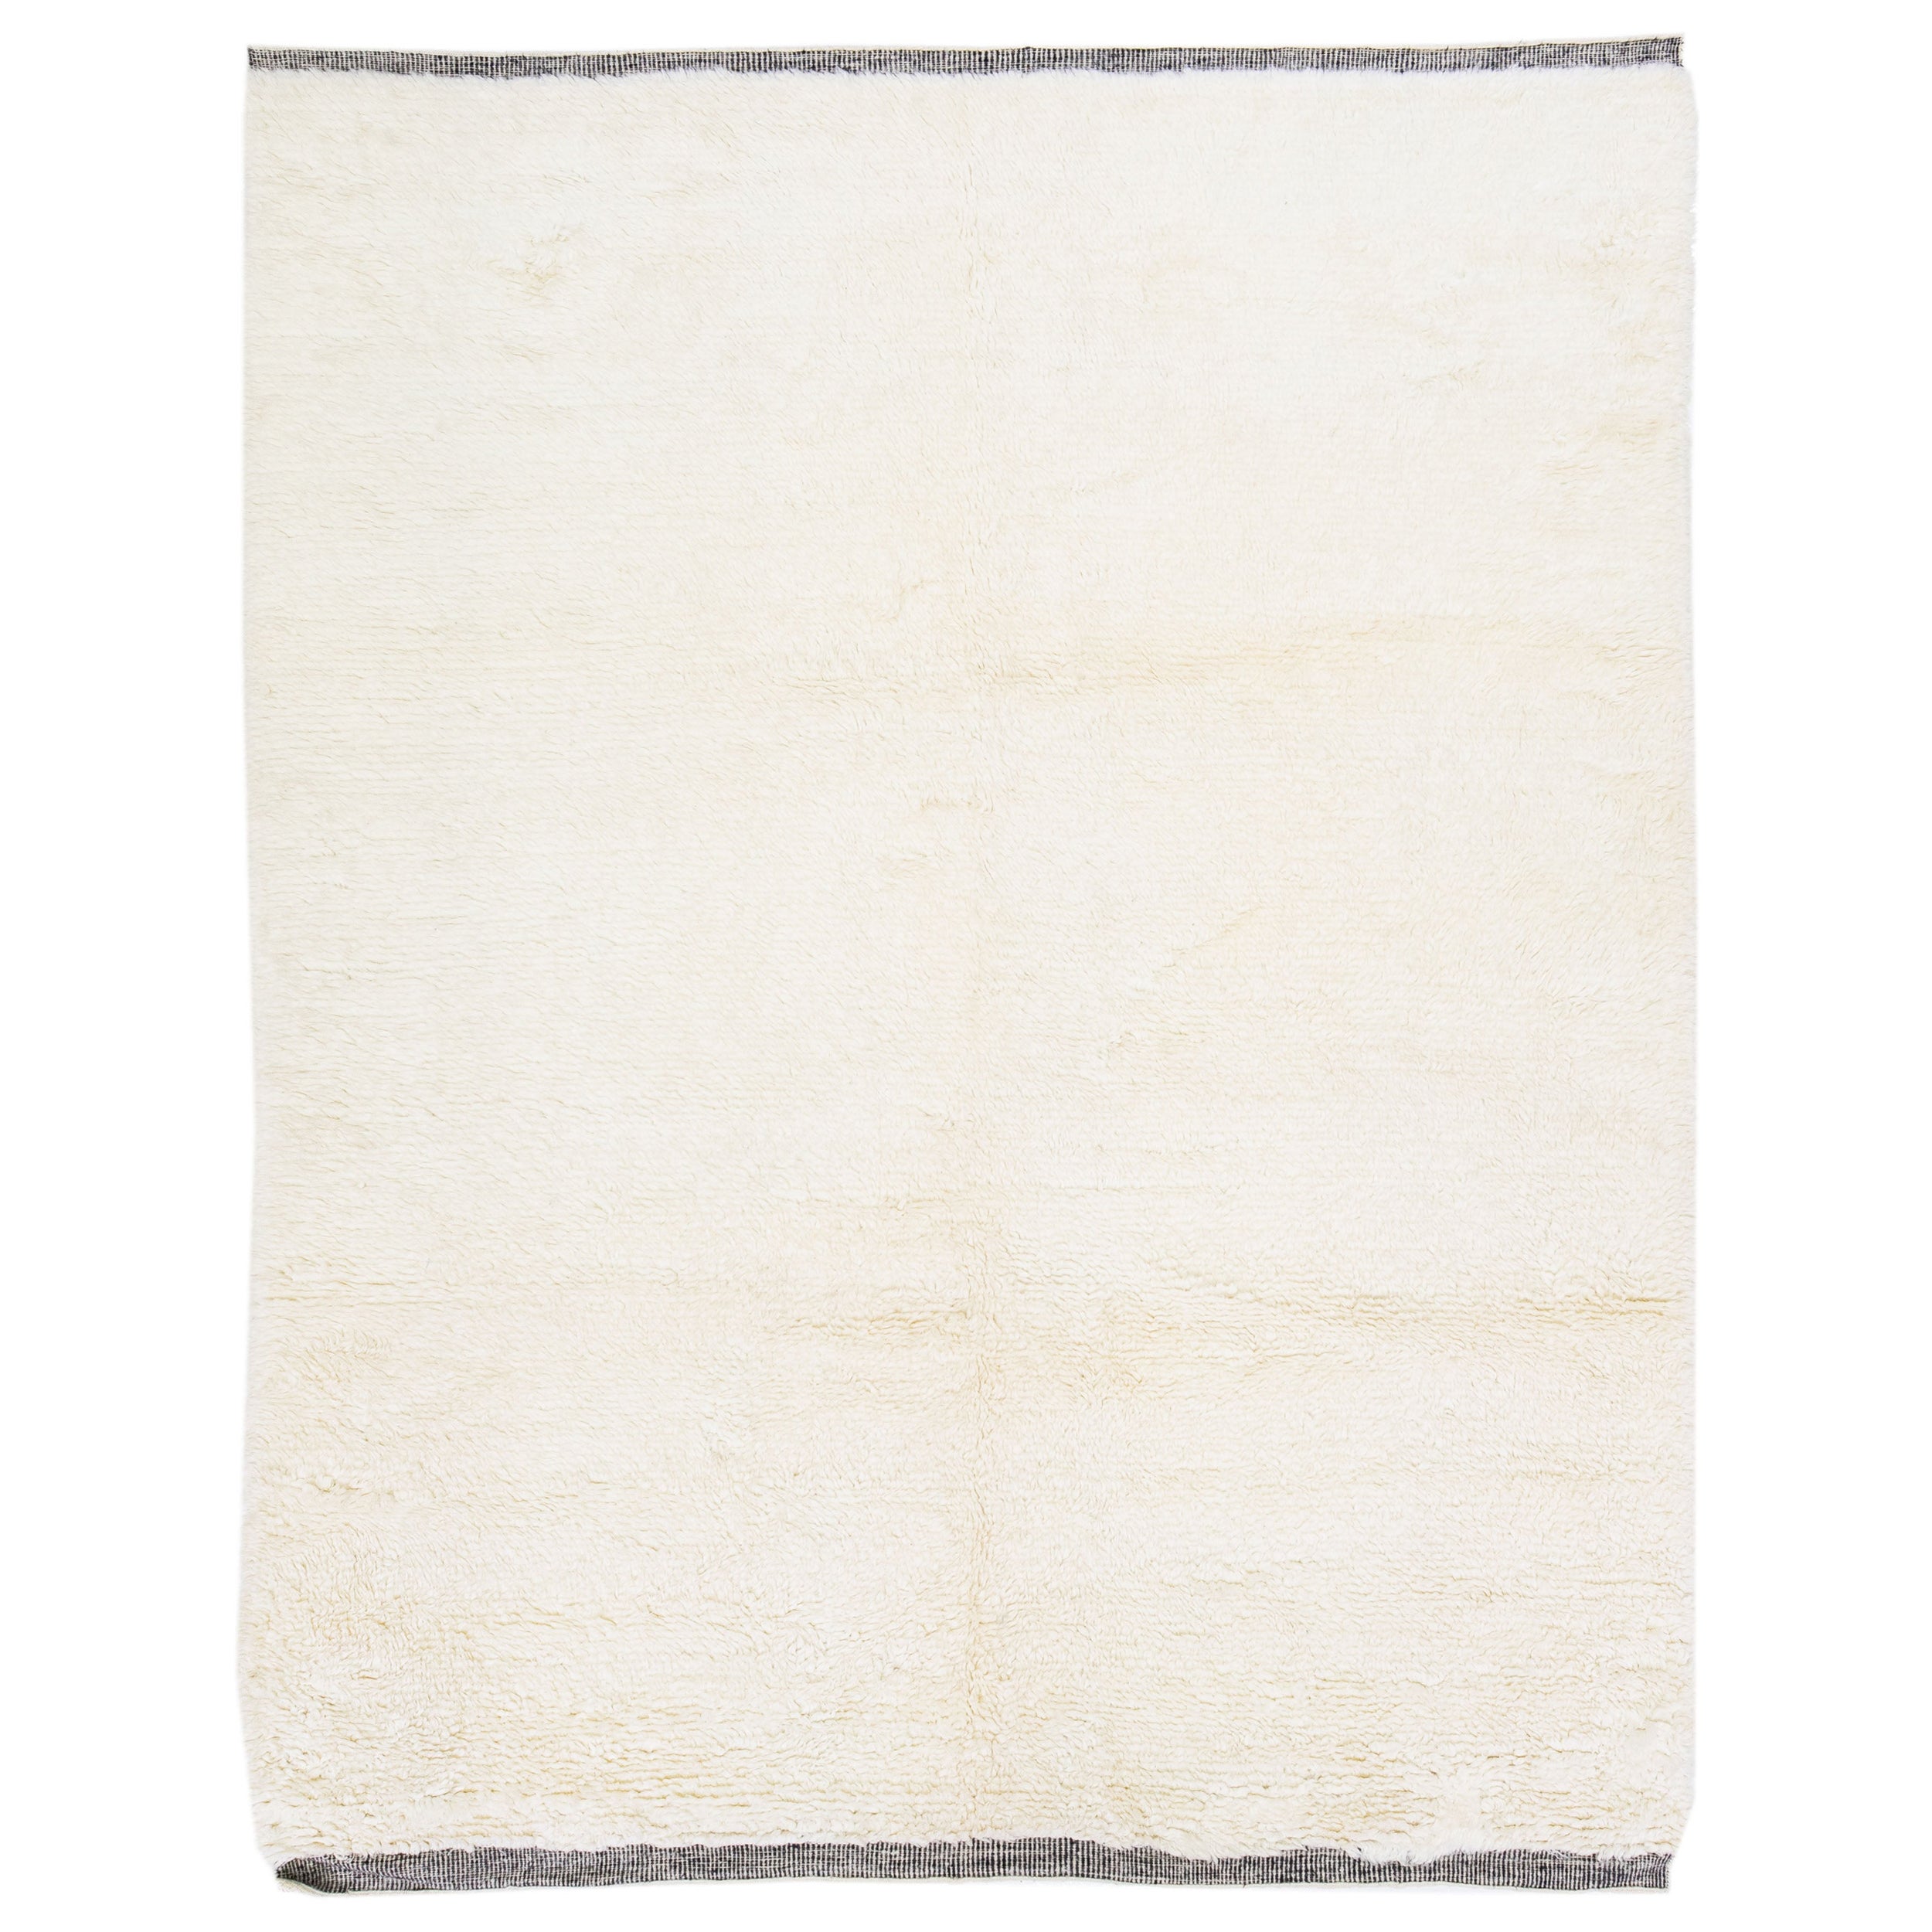 Modern Handmade Moroccan Style Wool Rug With Ivory Solid Field For Sale